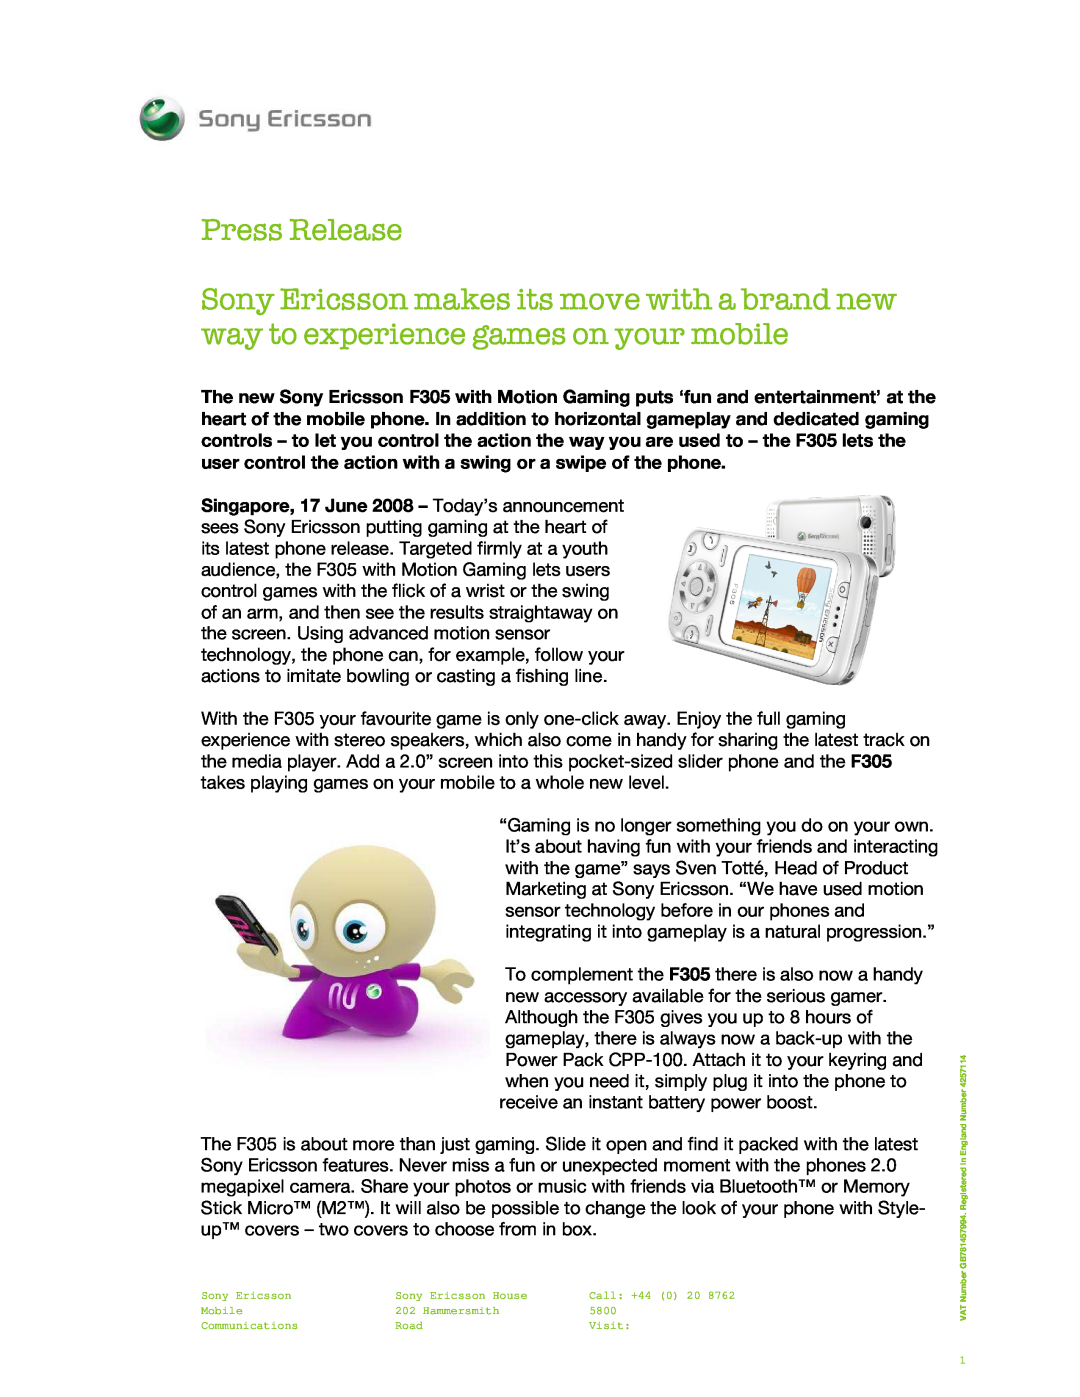 Sony Ericsson F305 manual Press Release, Sony Ericsson House, Call +44 0 20, Mobile, Hammersmith, 5800, Communications 